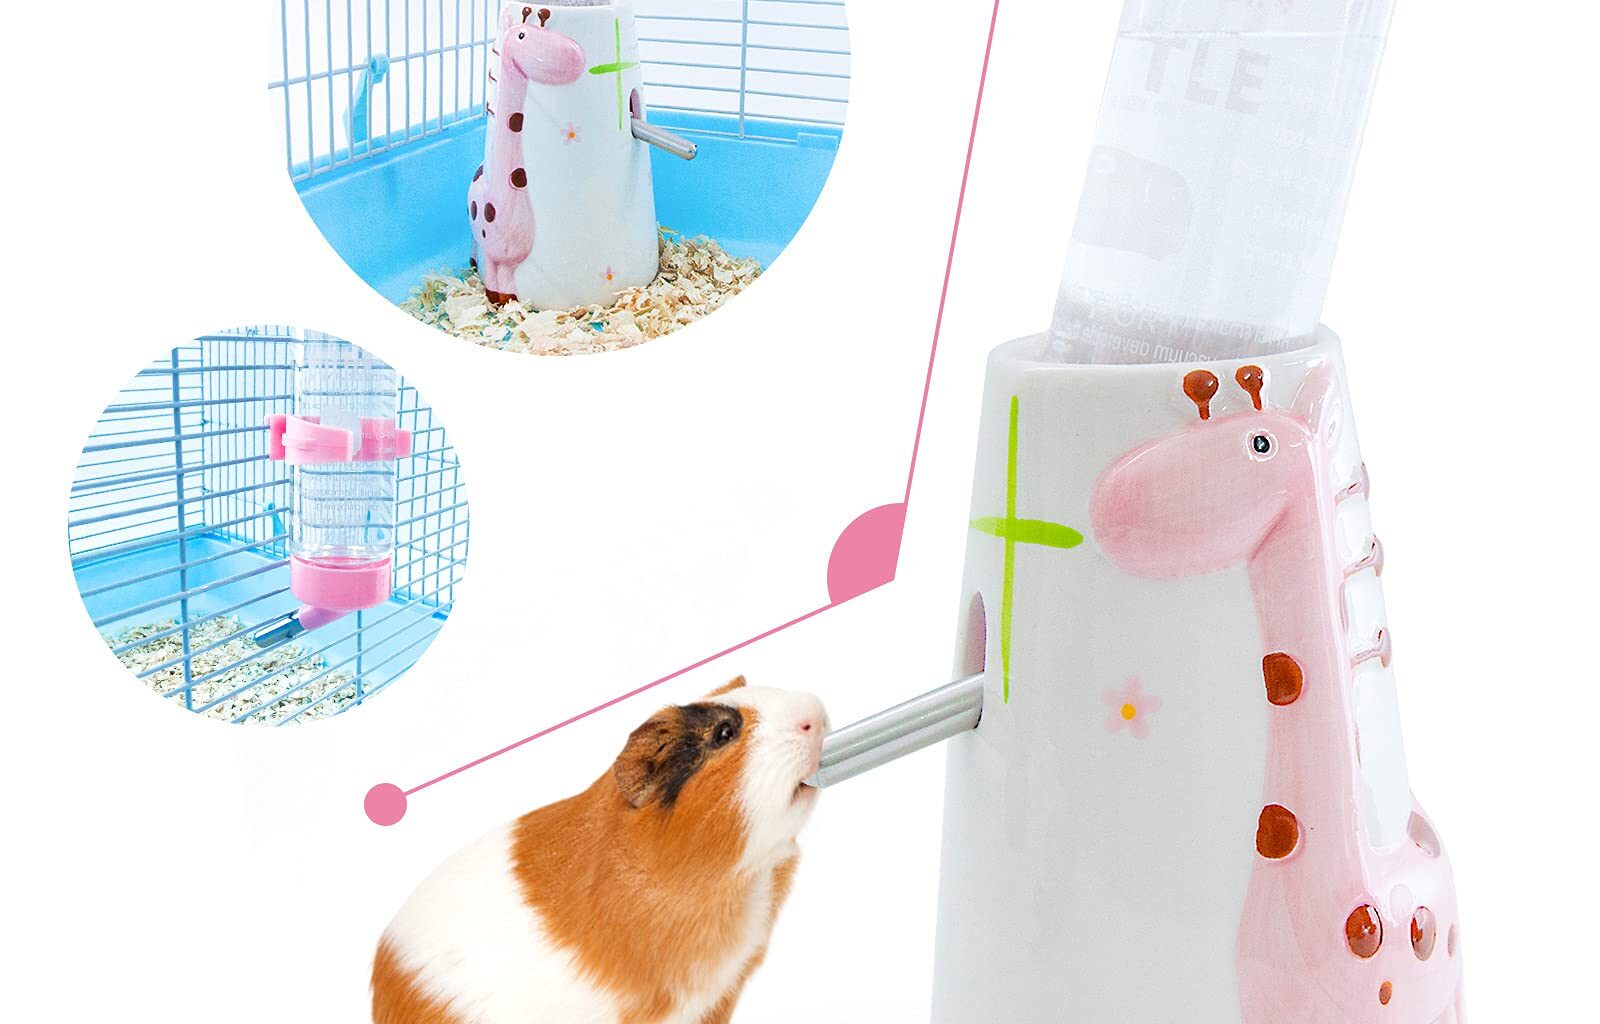 How to Clean Guinea Pig Water Bottle?